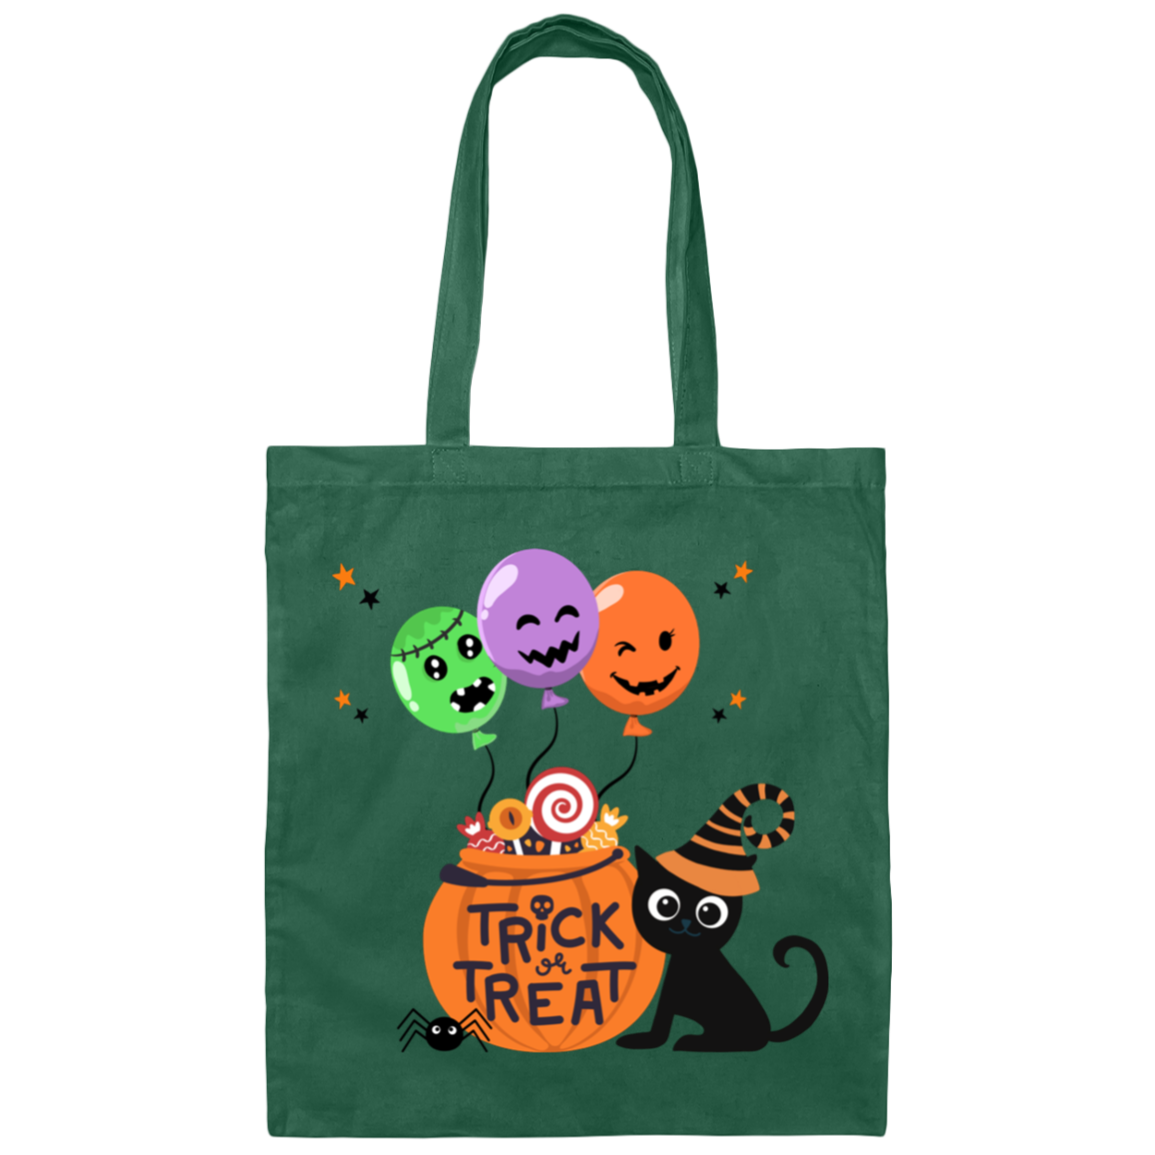 Fun Kittie and Candy, Front & Back Design - Trick or Treat Bag